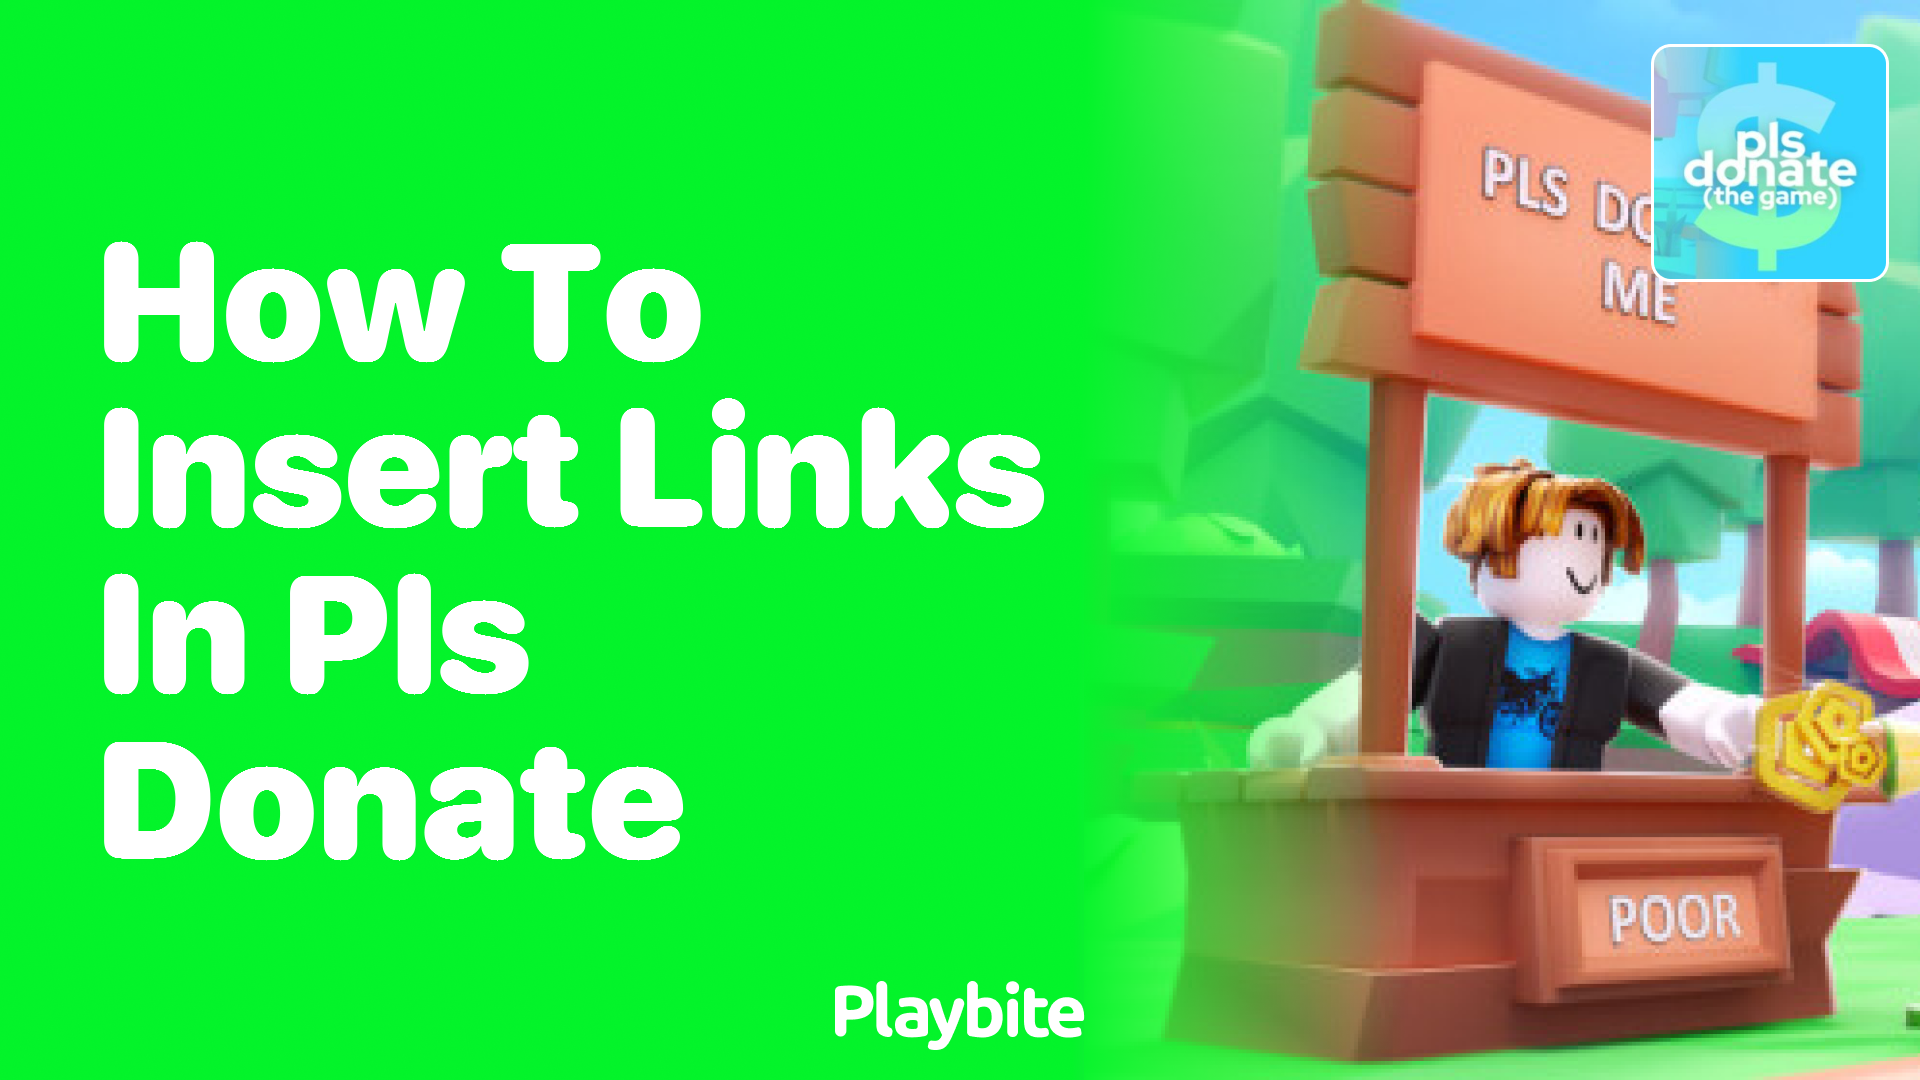 How to Insert Links in PLS DONATE on Roblox